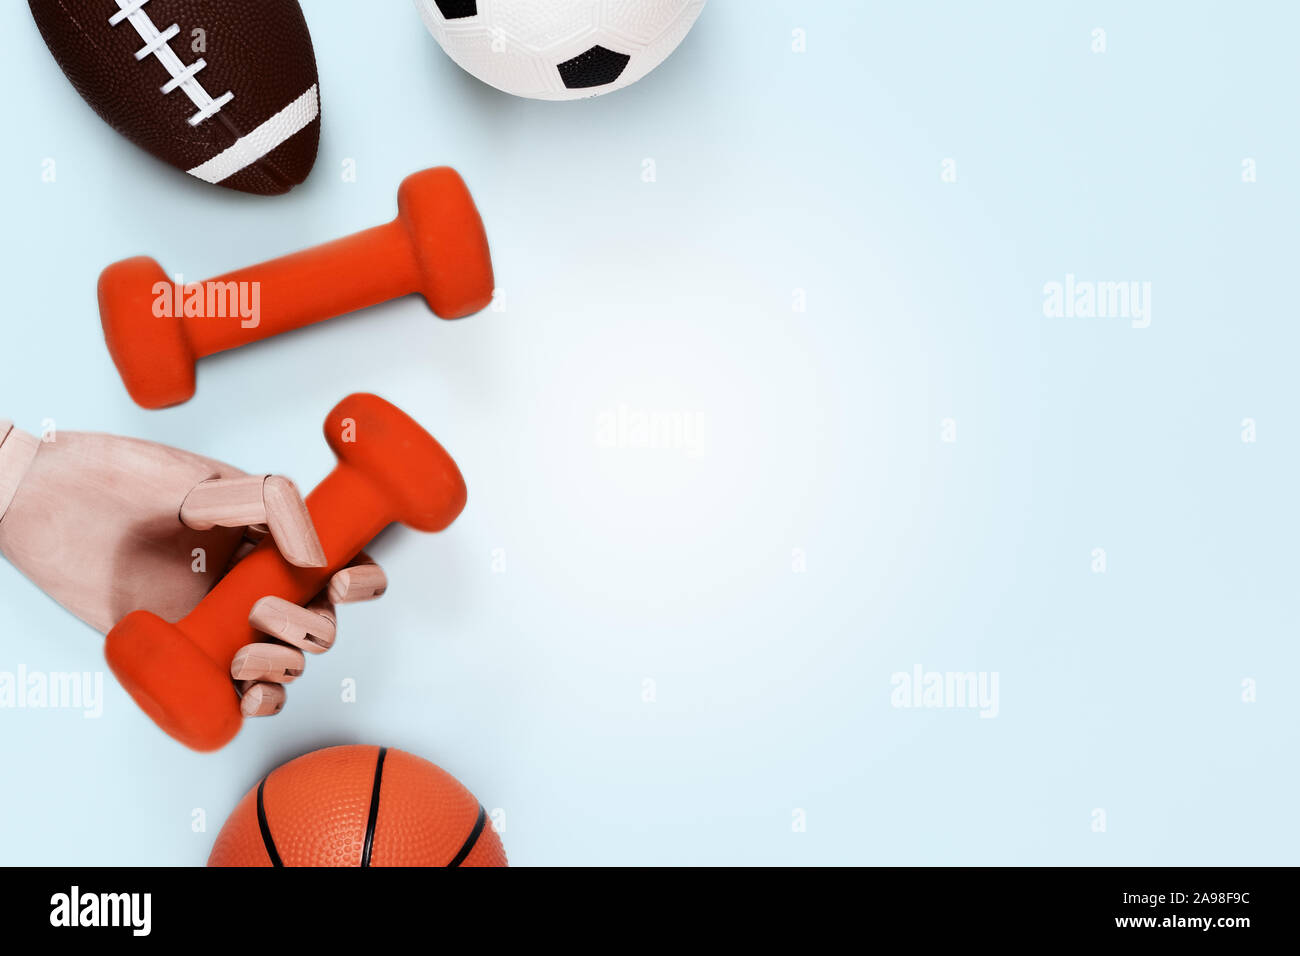 sport, fitness, game, sports equipment and objects concept Stock Photo